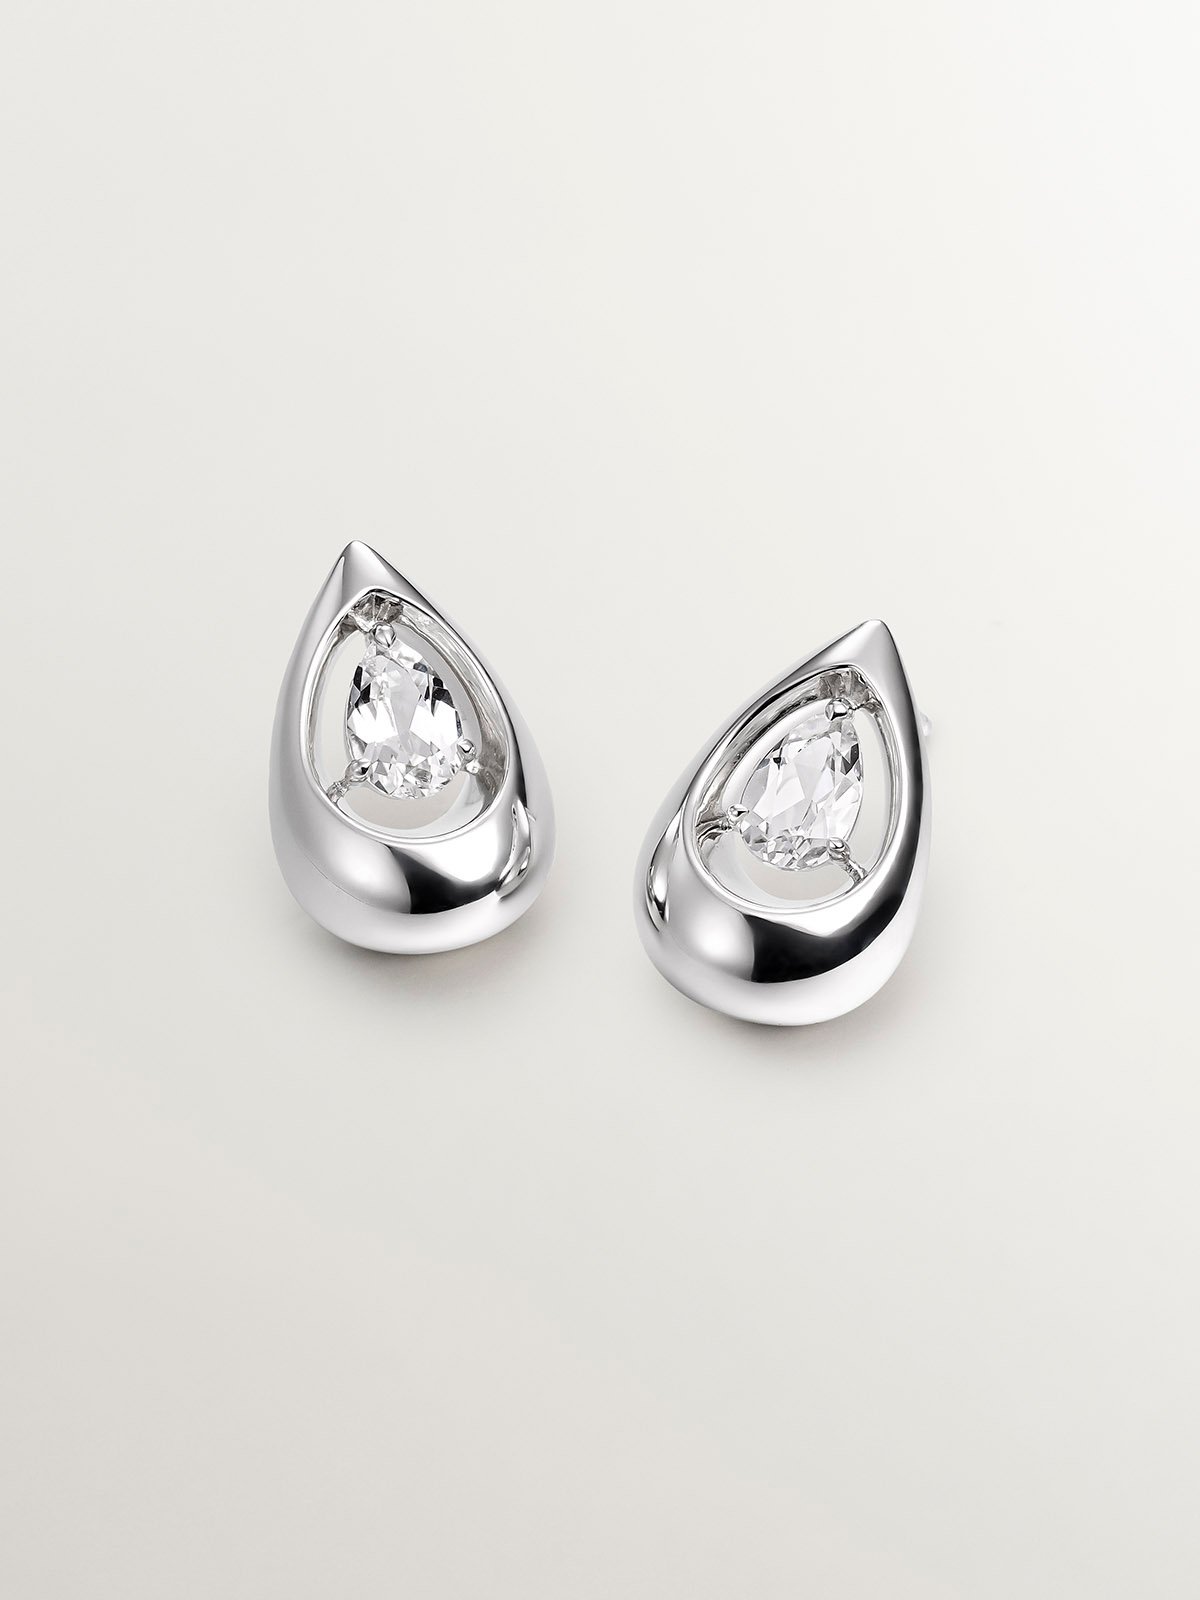 925 silver earrings with white topazes